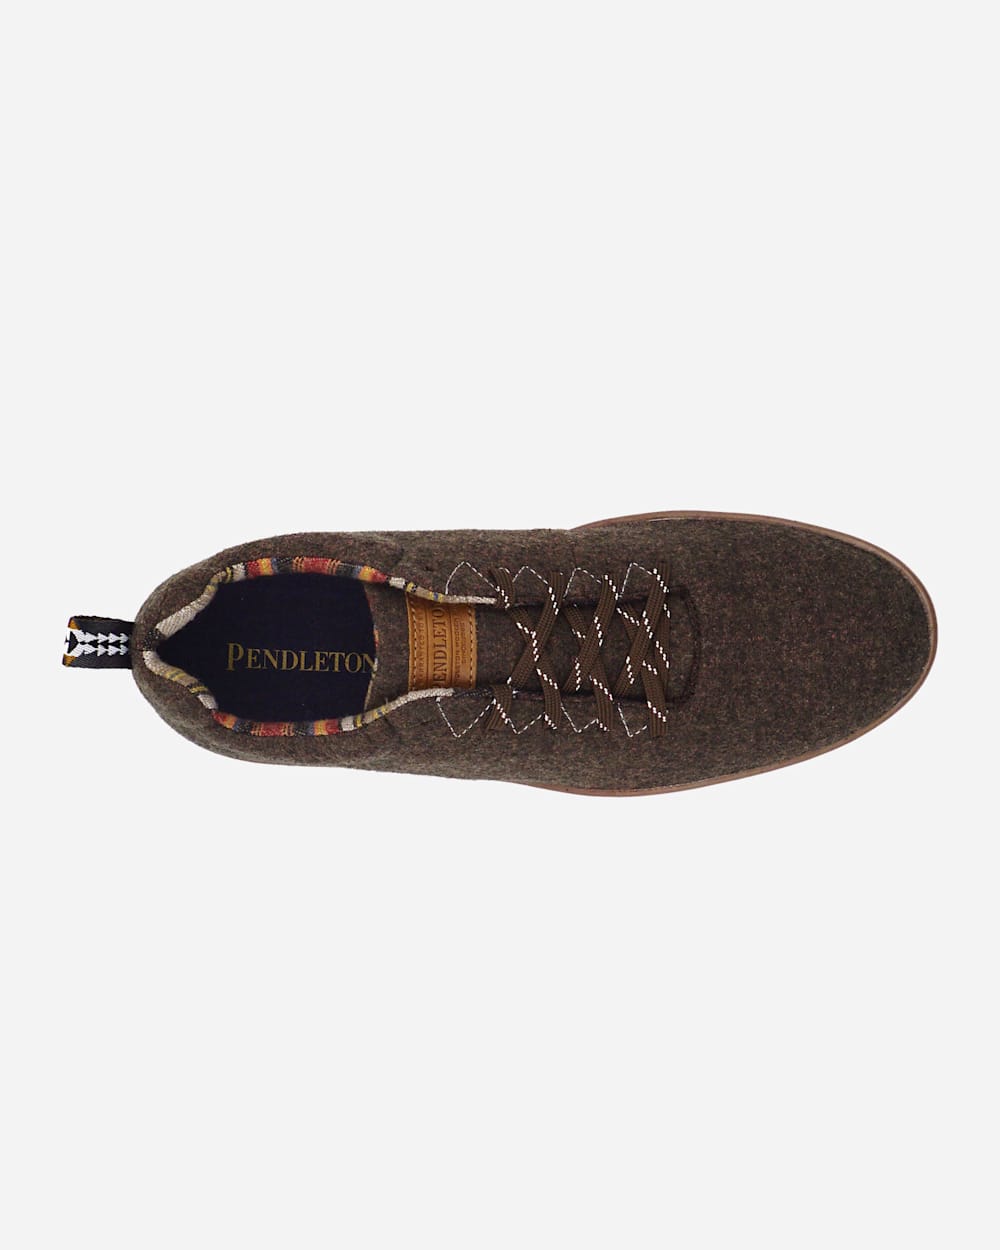 ADDITIONAL VIEW OF MEN'S PENDLETON WOOL SNEAKERS IN BROWN HEATHER image number 2